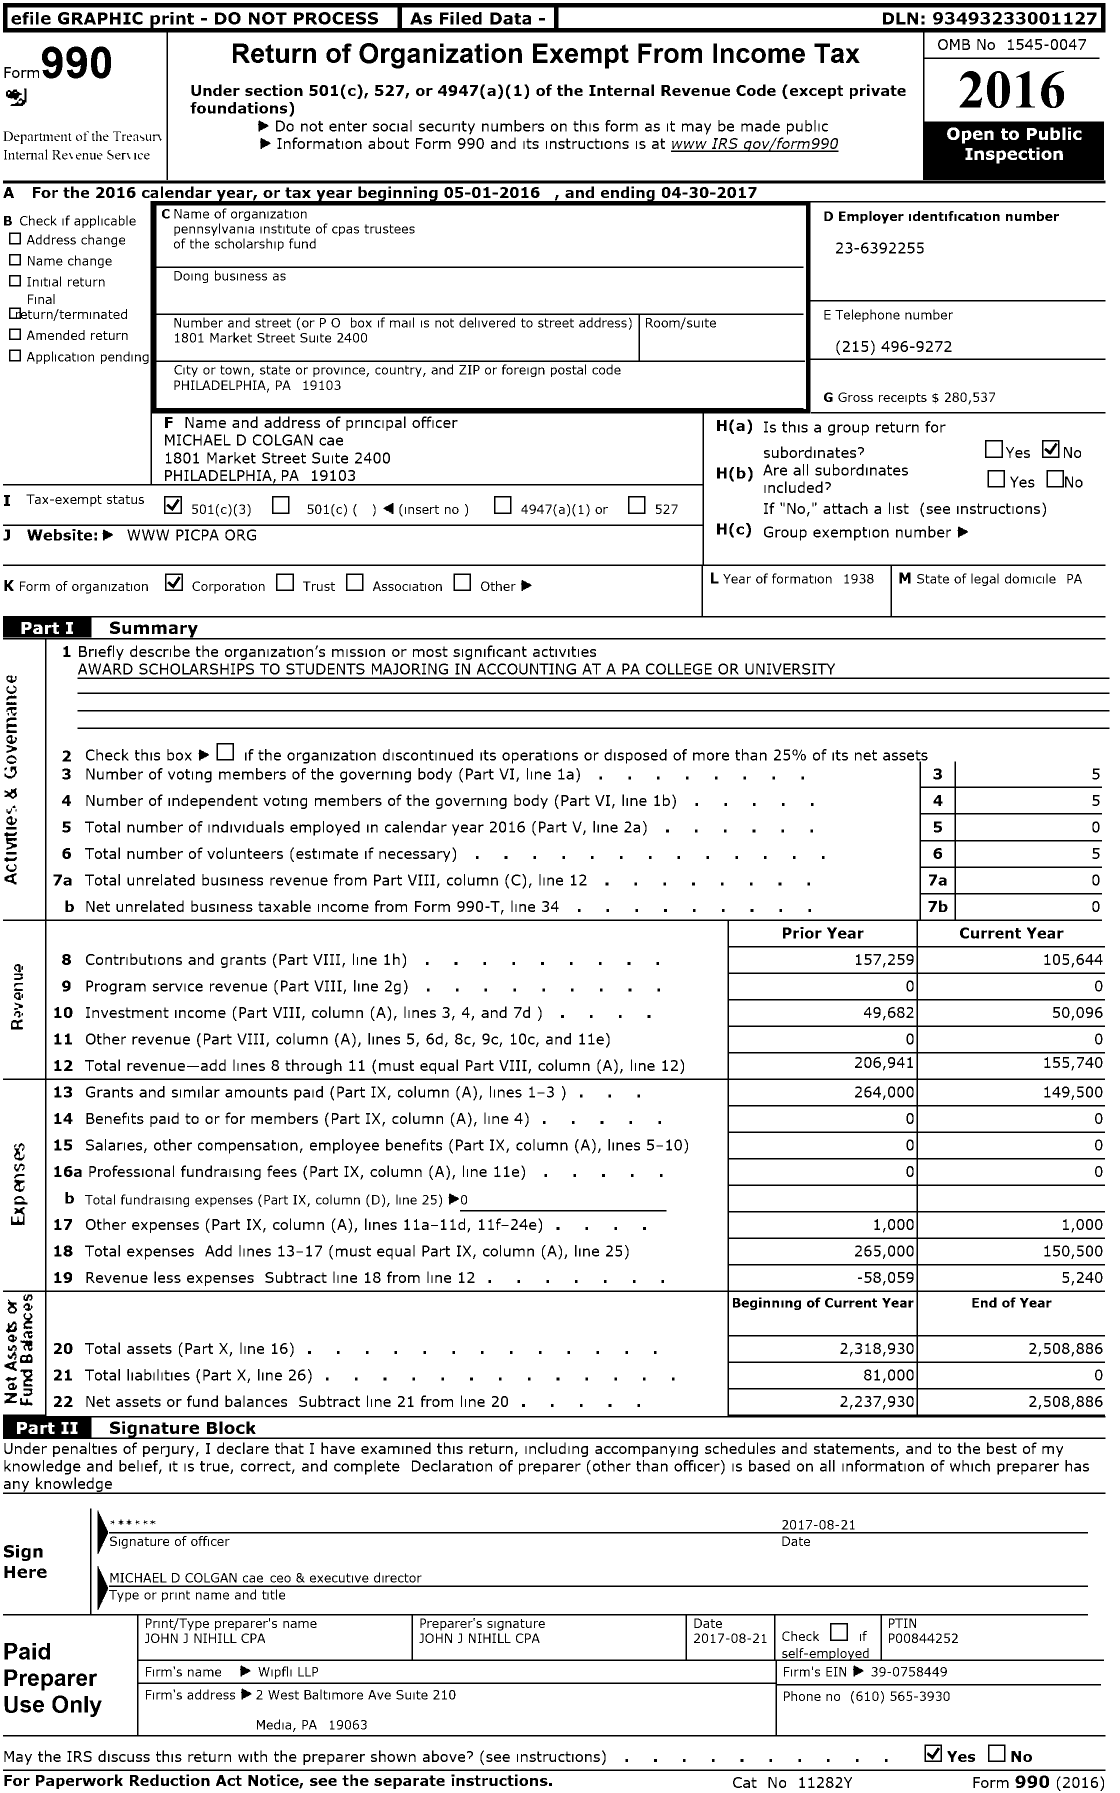 Image of first page of 2016 Form 990 for pennsylvania institute of cpas trustees of the scholarship fund